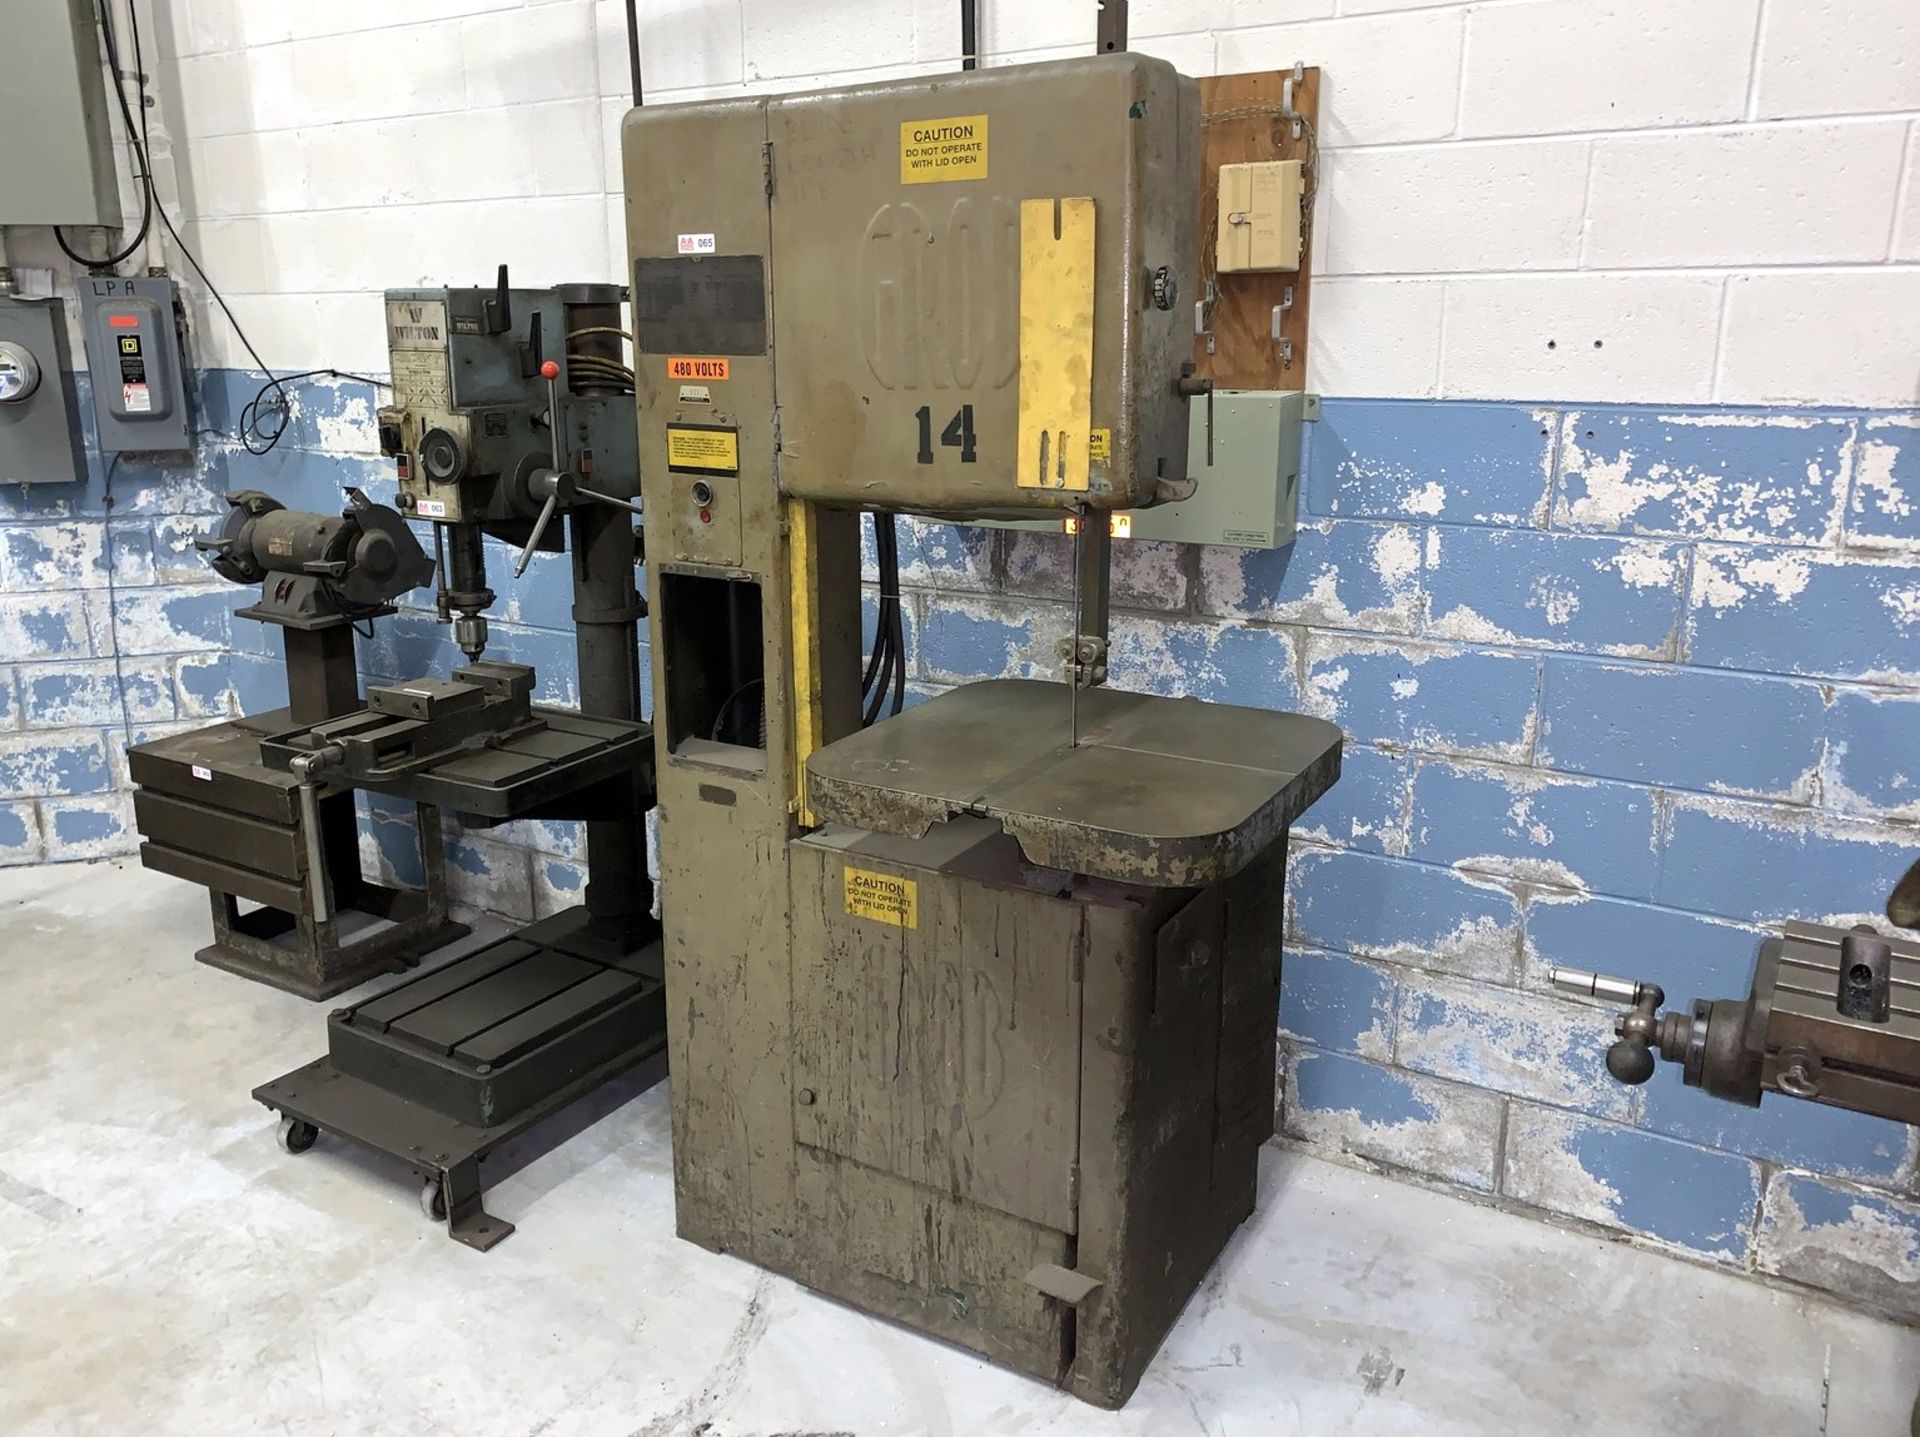 Grob Vertical Band Saw, Metal Cutting Type, 17-1/2" Throat, 24" x 24" Tilting Table (NOTE: Blade